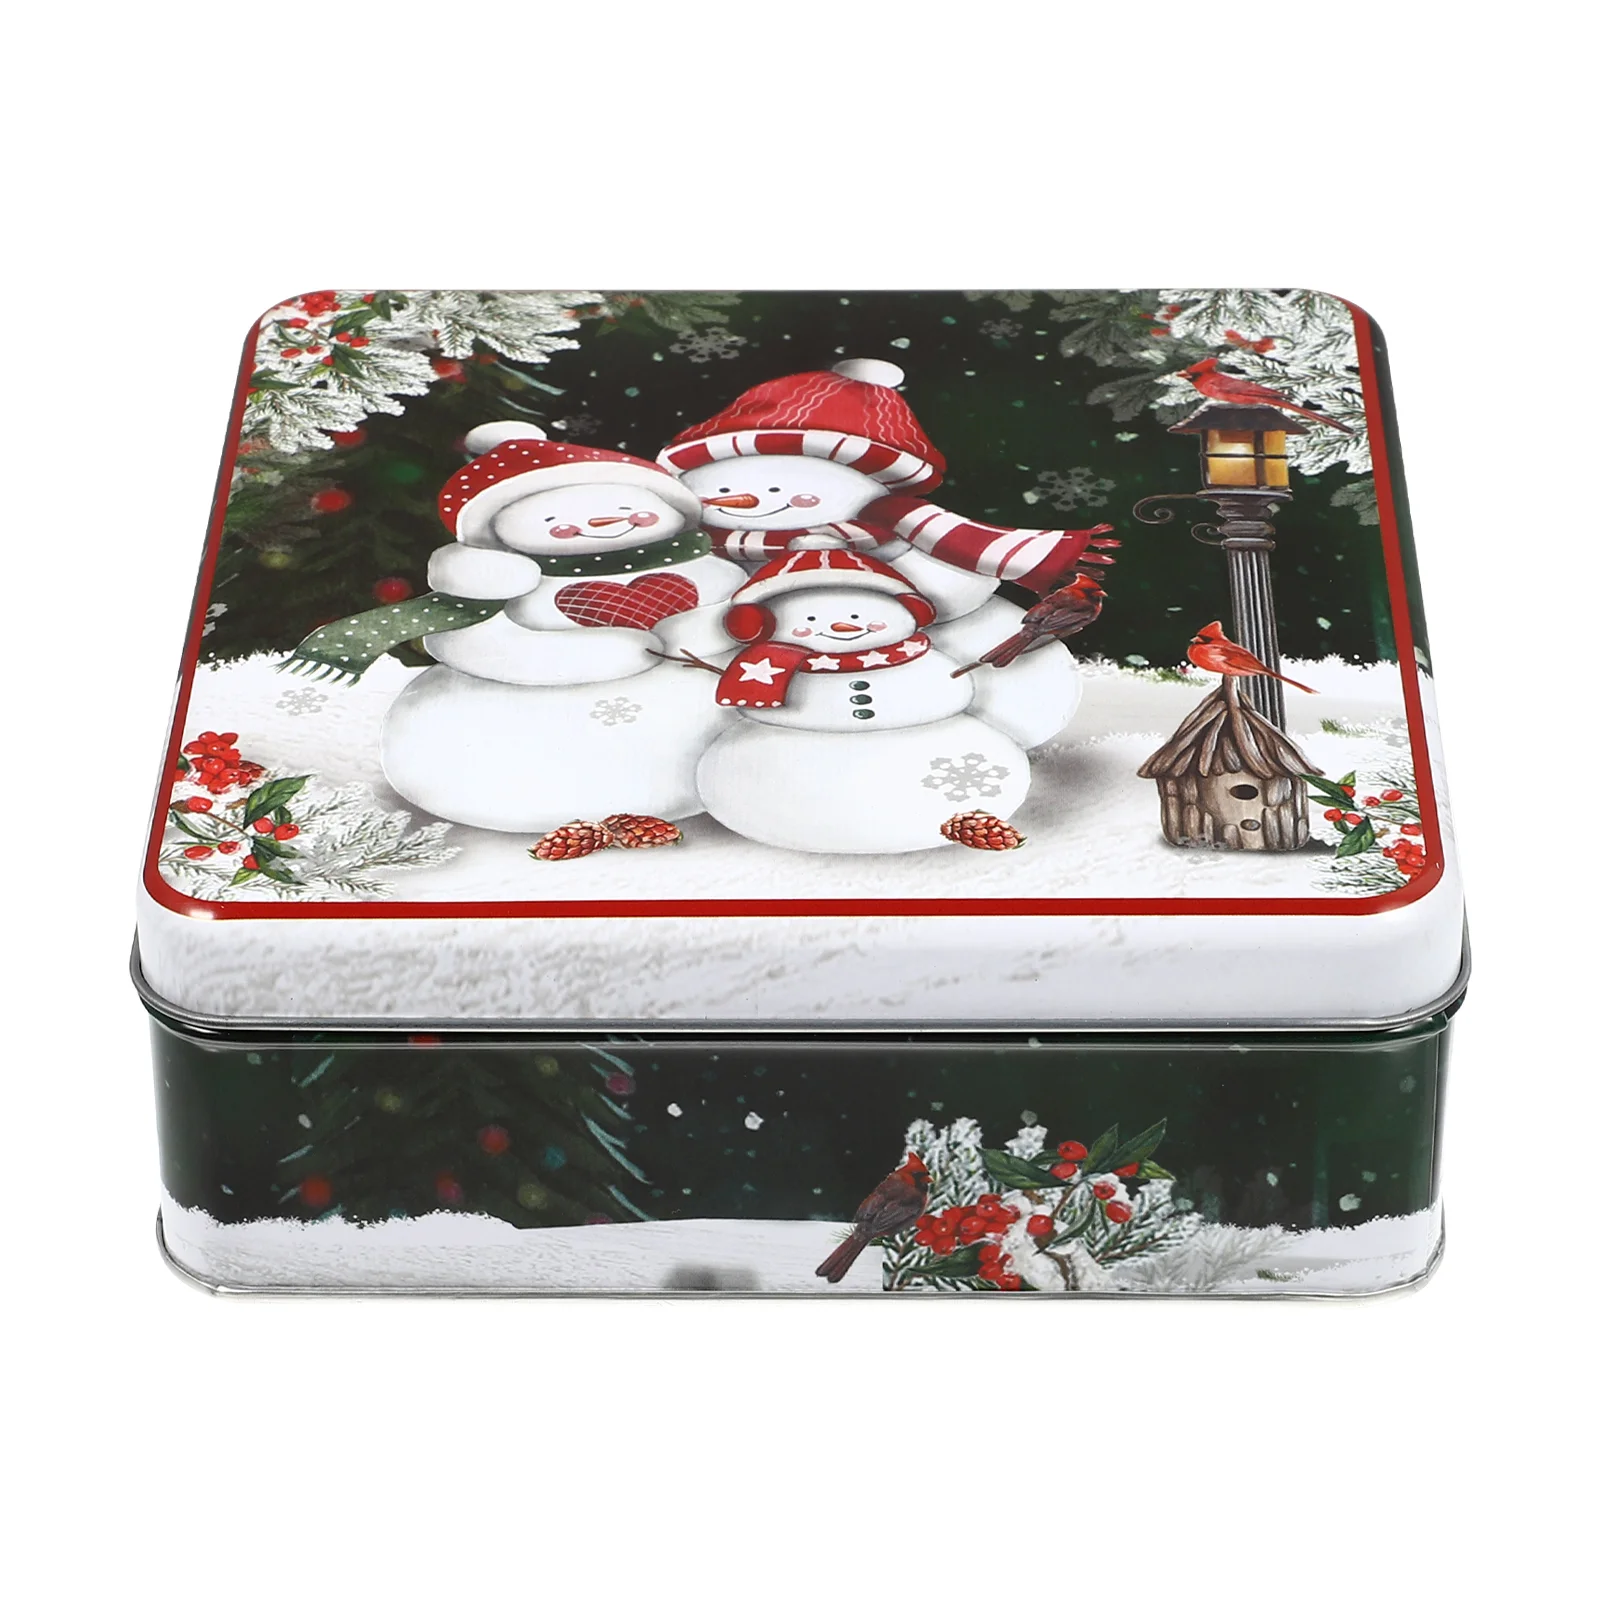 

Christmas Cookie Tins Santa Claus Snowman Tin Boxes Xmas Candy Tins Trick Or Treat Box Holiday Snack Jar Biscuits Container